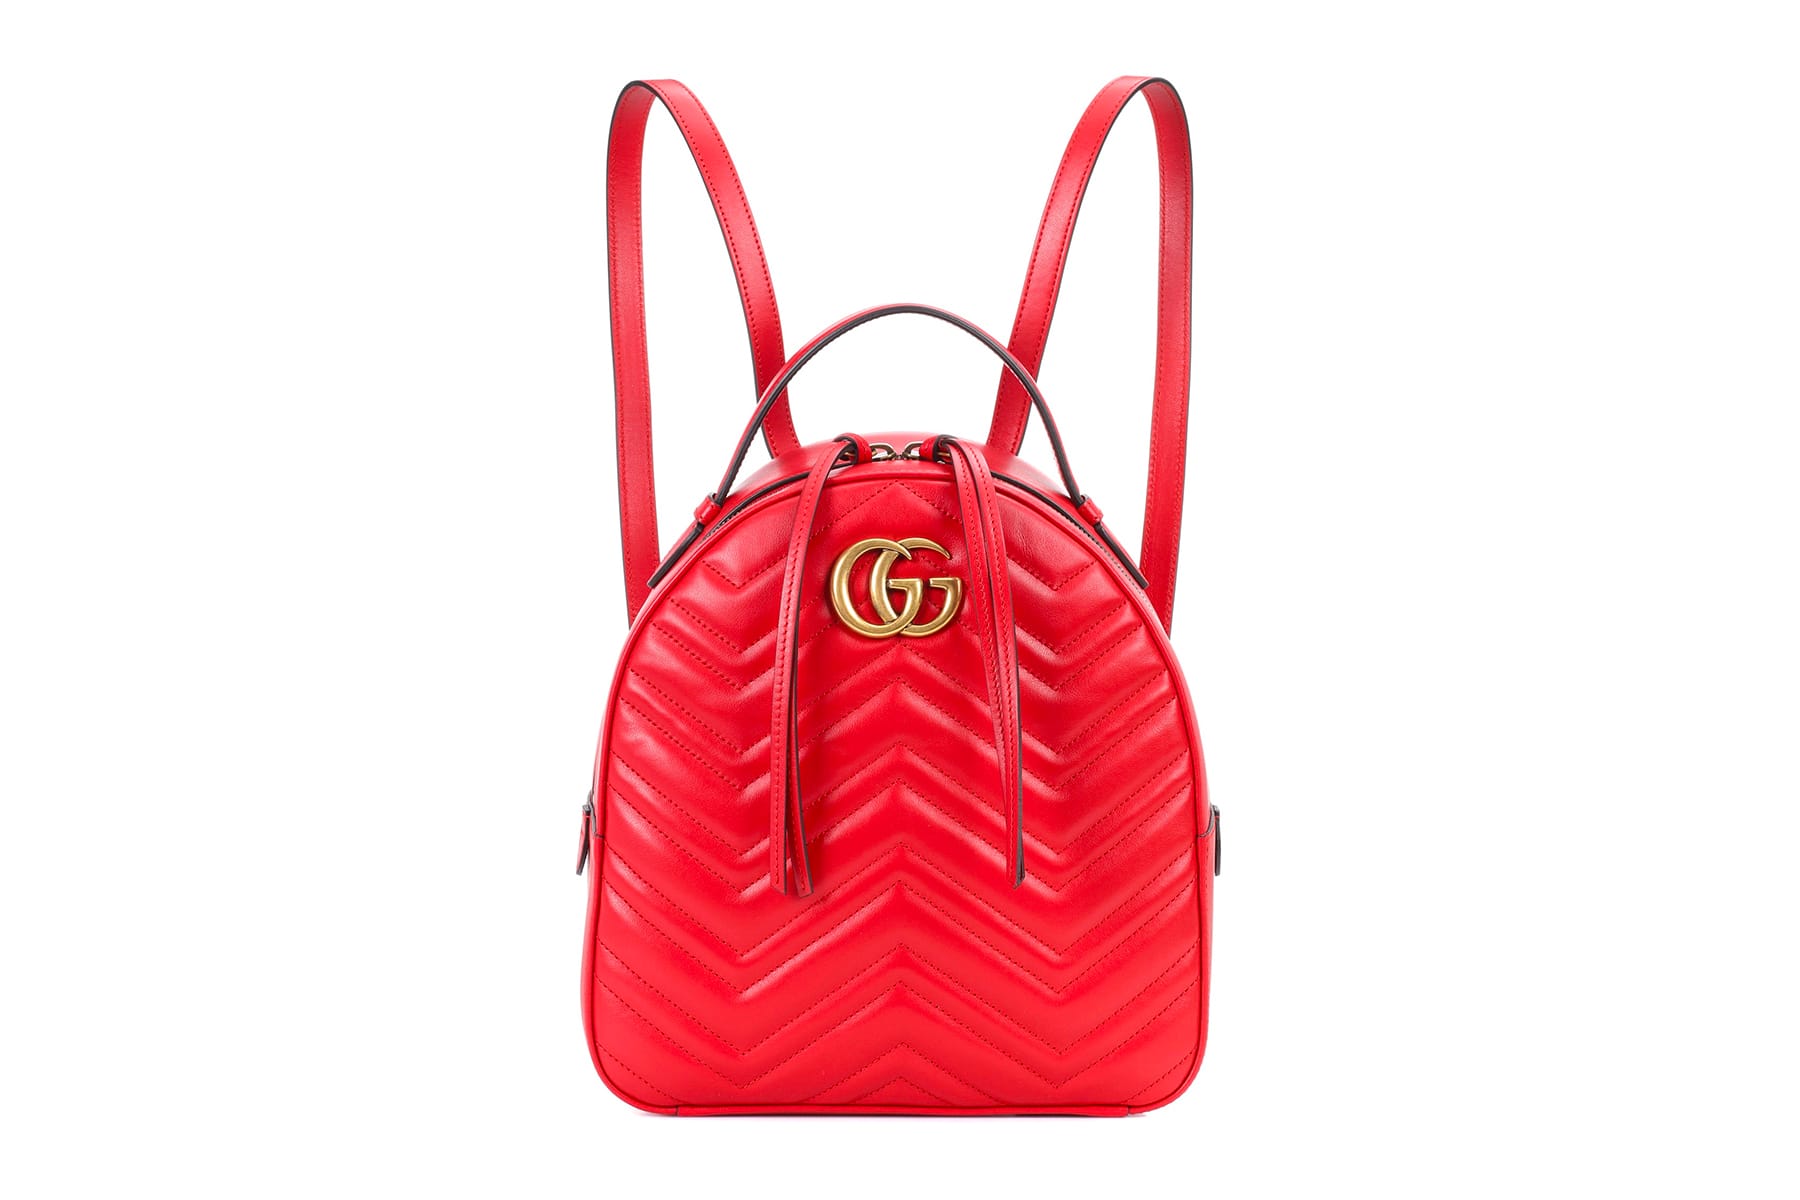 Gucci GG Marmont Leather Backpack in 